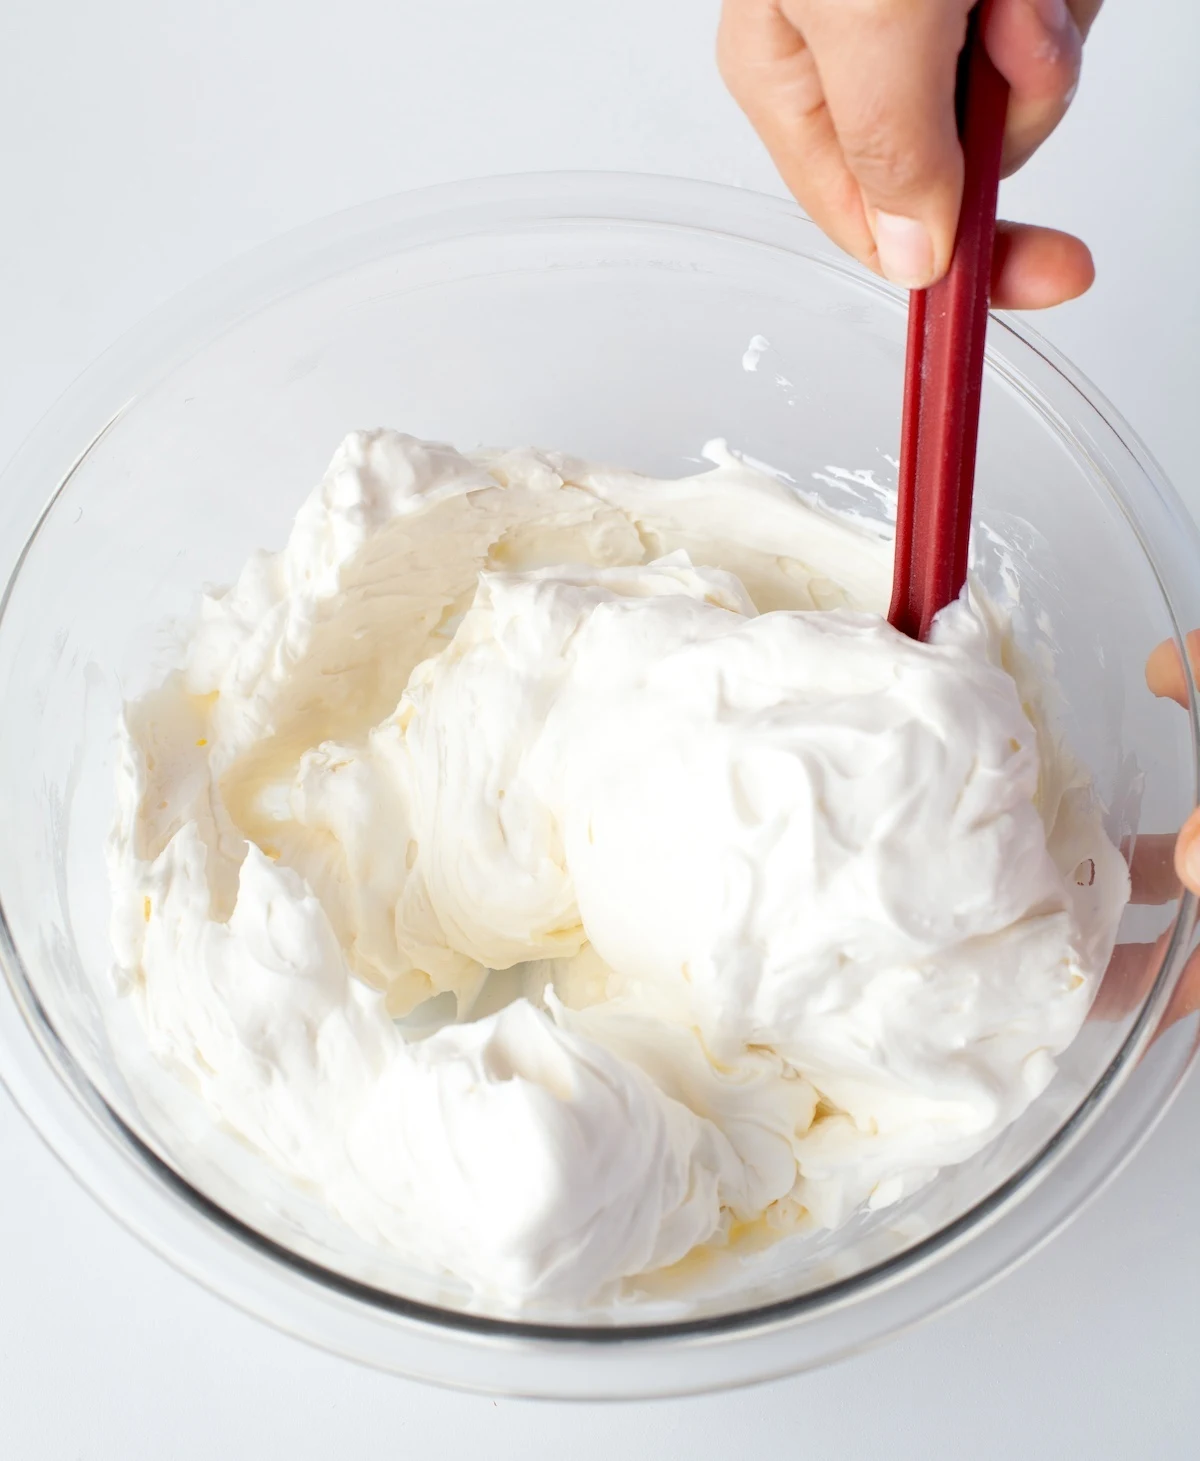 Combining Whipped Cream and Cream Cheese Mixtures